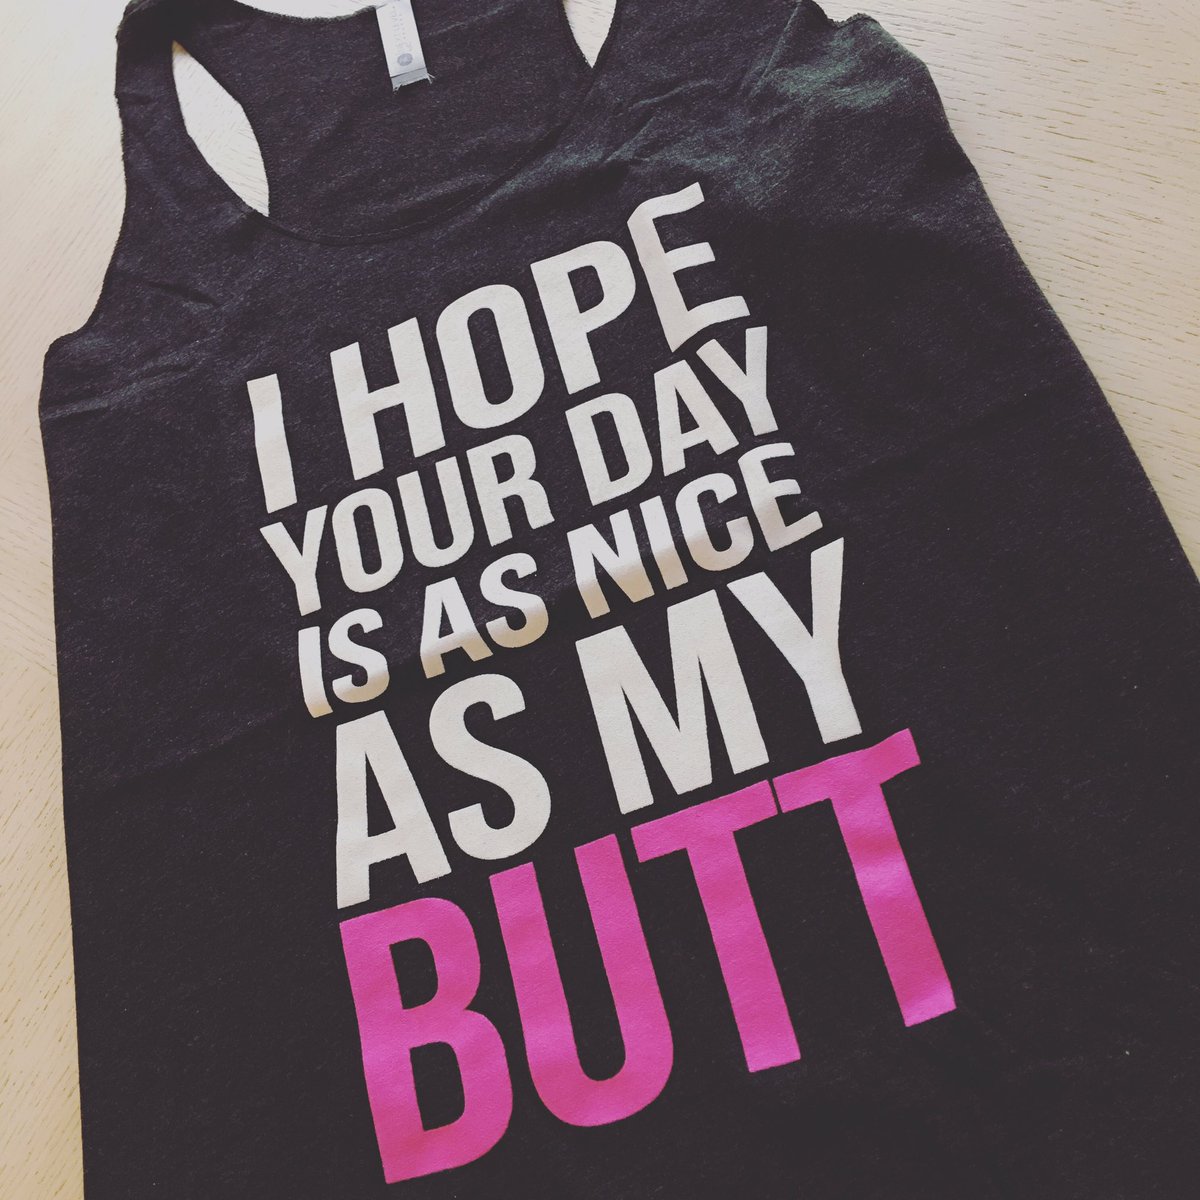 Just got my new running tank top in! What do you think? Too much? LoL! #running #notyouraveragerunner #5kchallenge #comfortisking #justrun #doingitforme #sirmixalotapproved